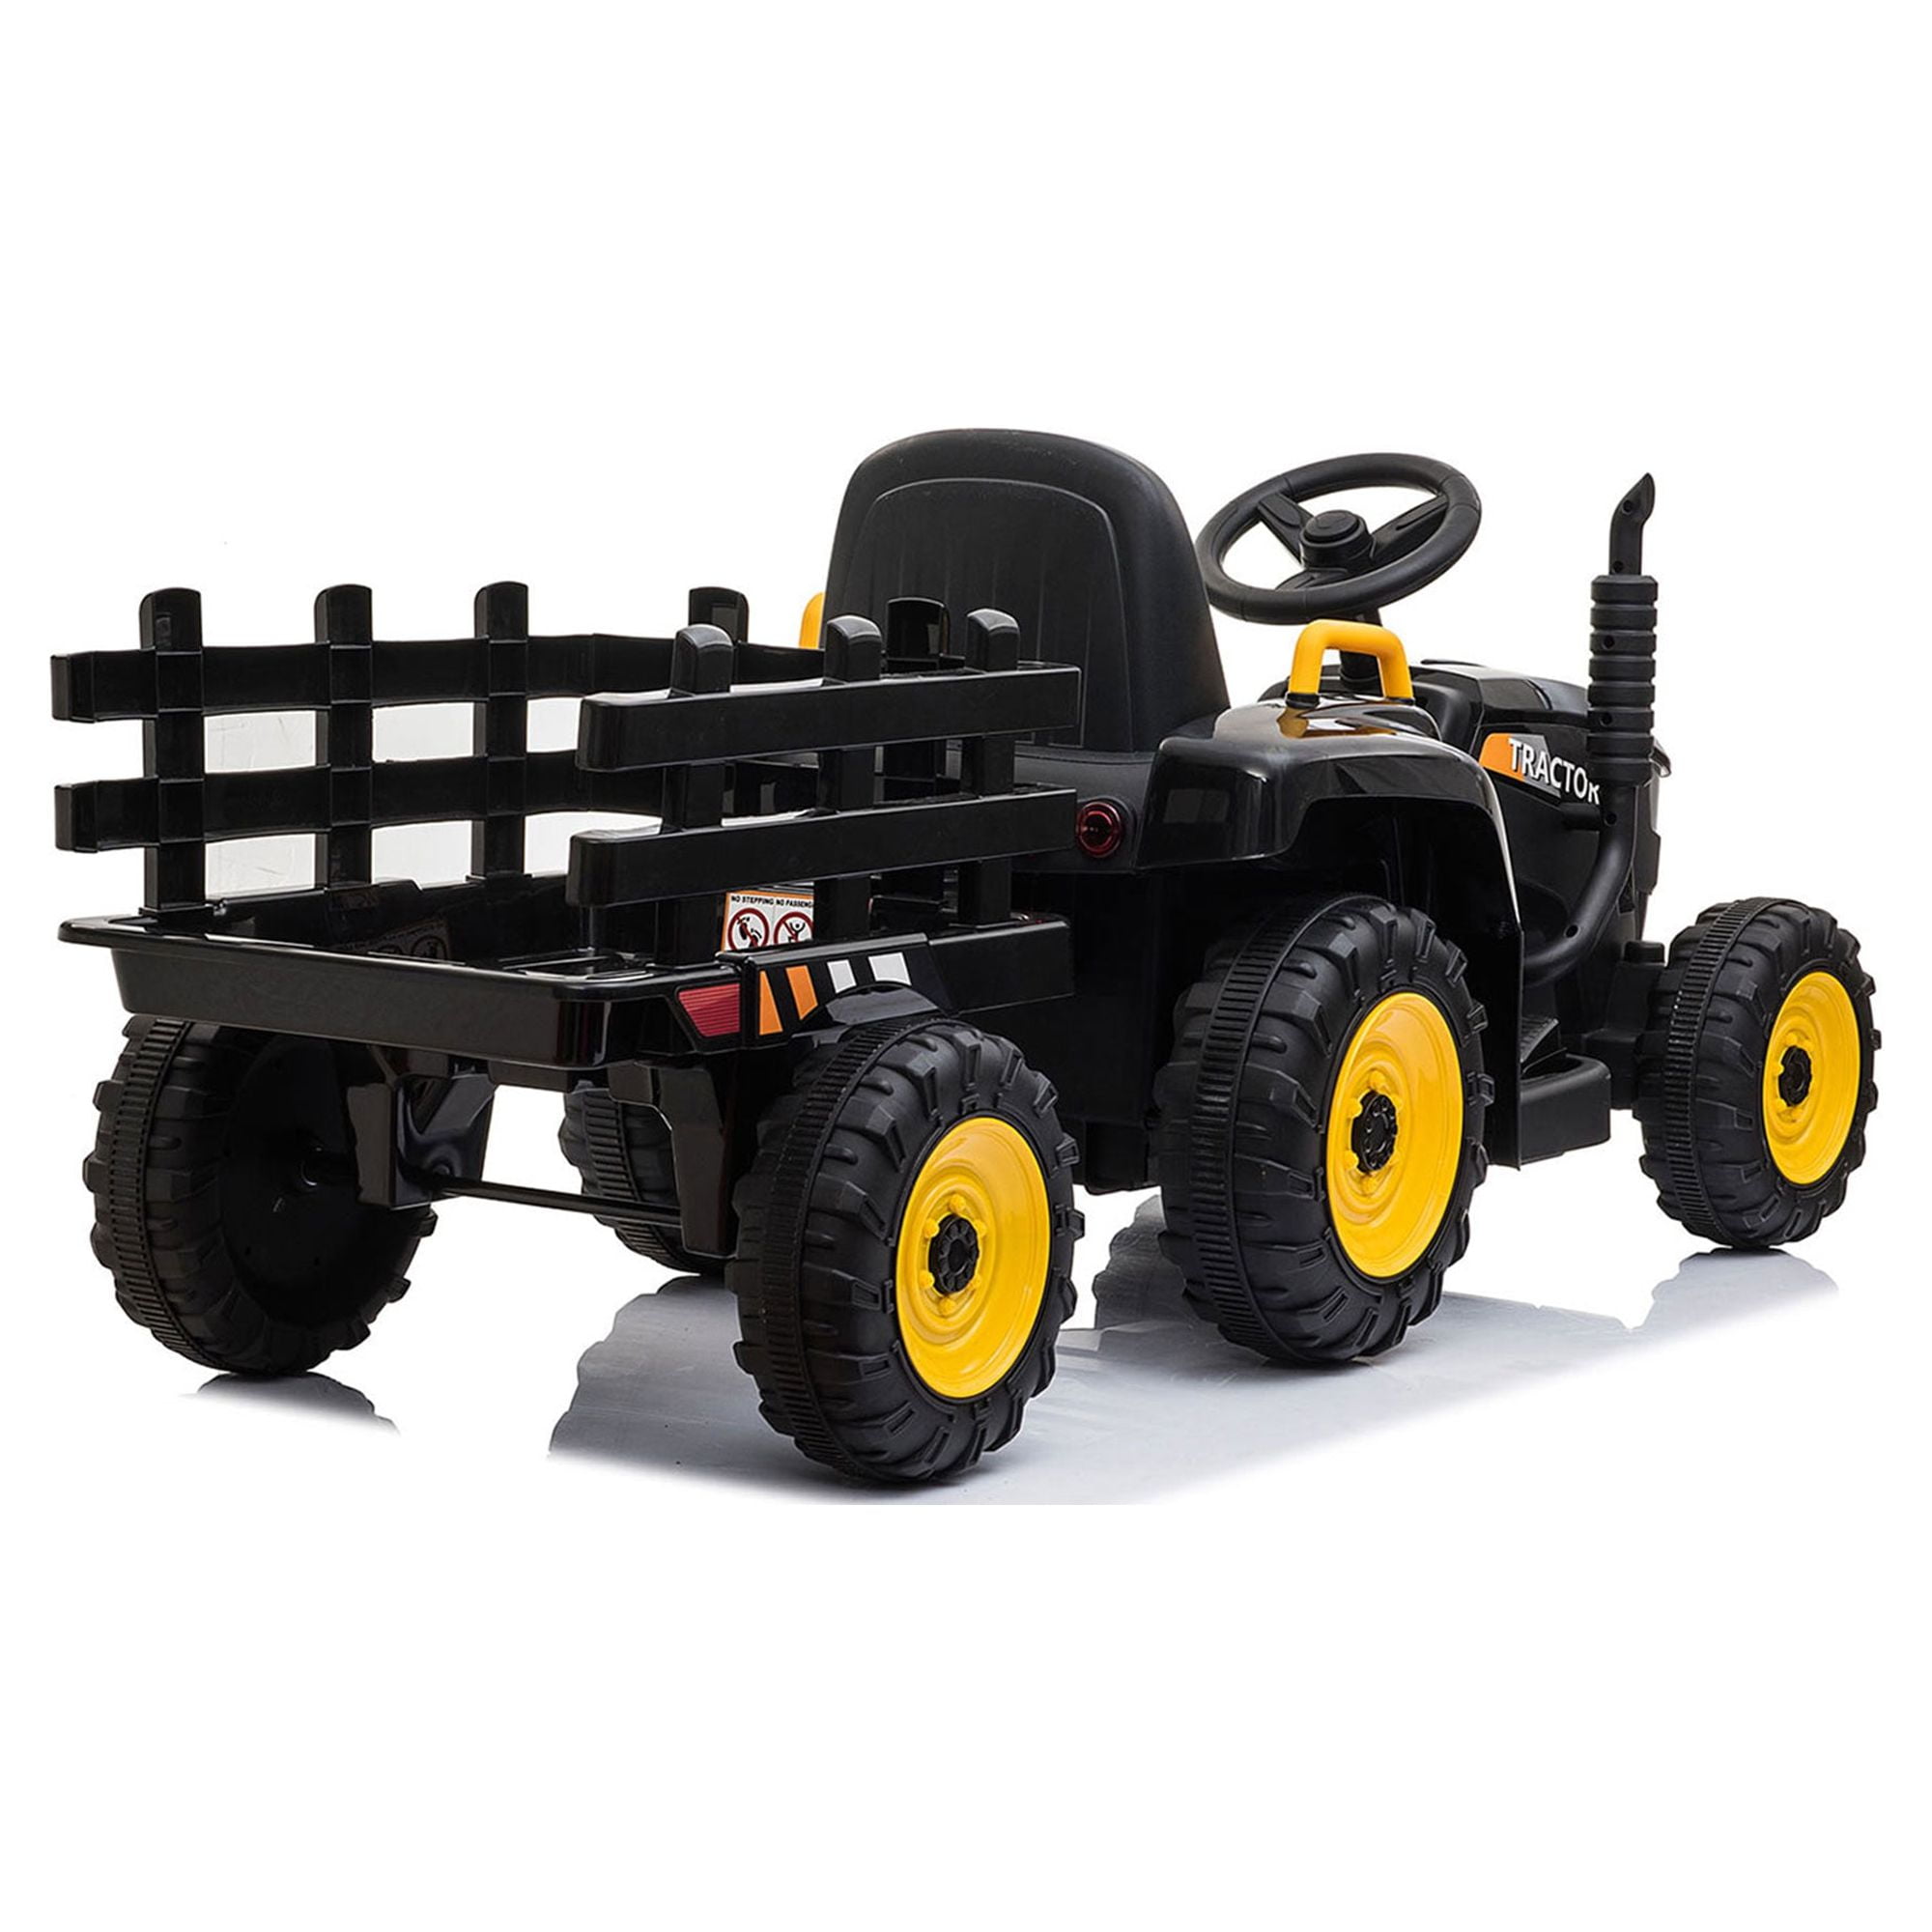 TOBBI 12V Electric Battery-Powered Ride On Toy Tractor Trailer, Black 